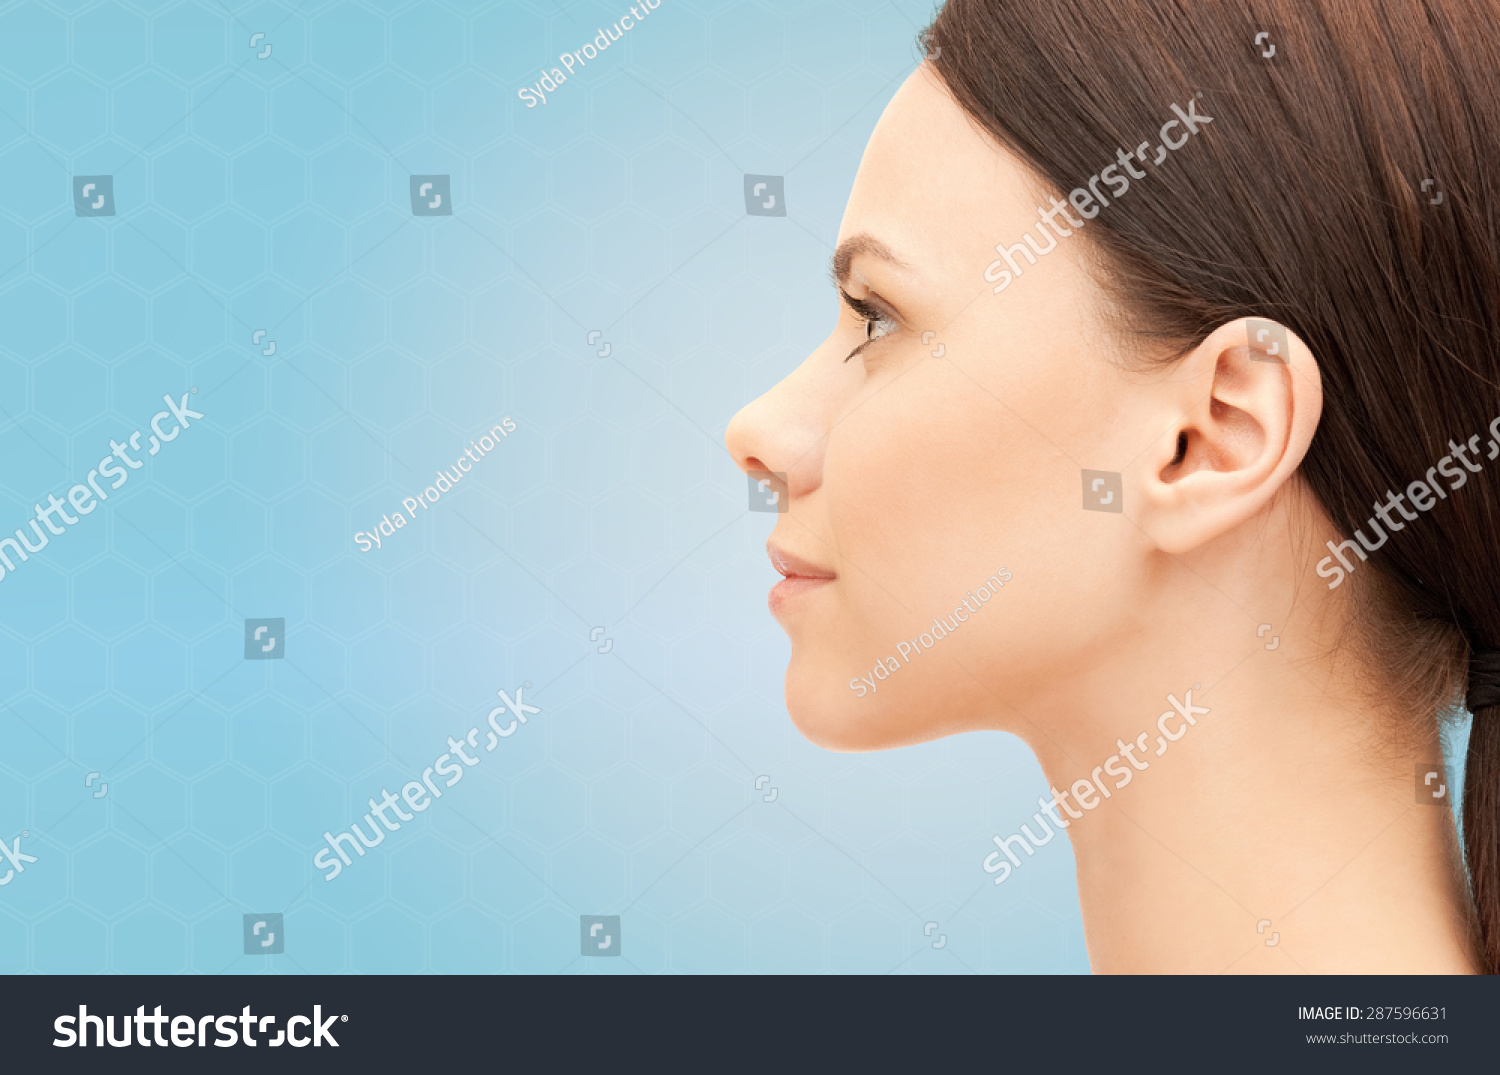 stock-photo-health-people-plastic-surgery-and-beauty-concept-beautiful-young-woman-face-over-blue-background-287596631.jpg